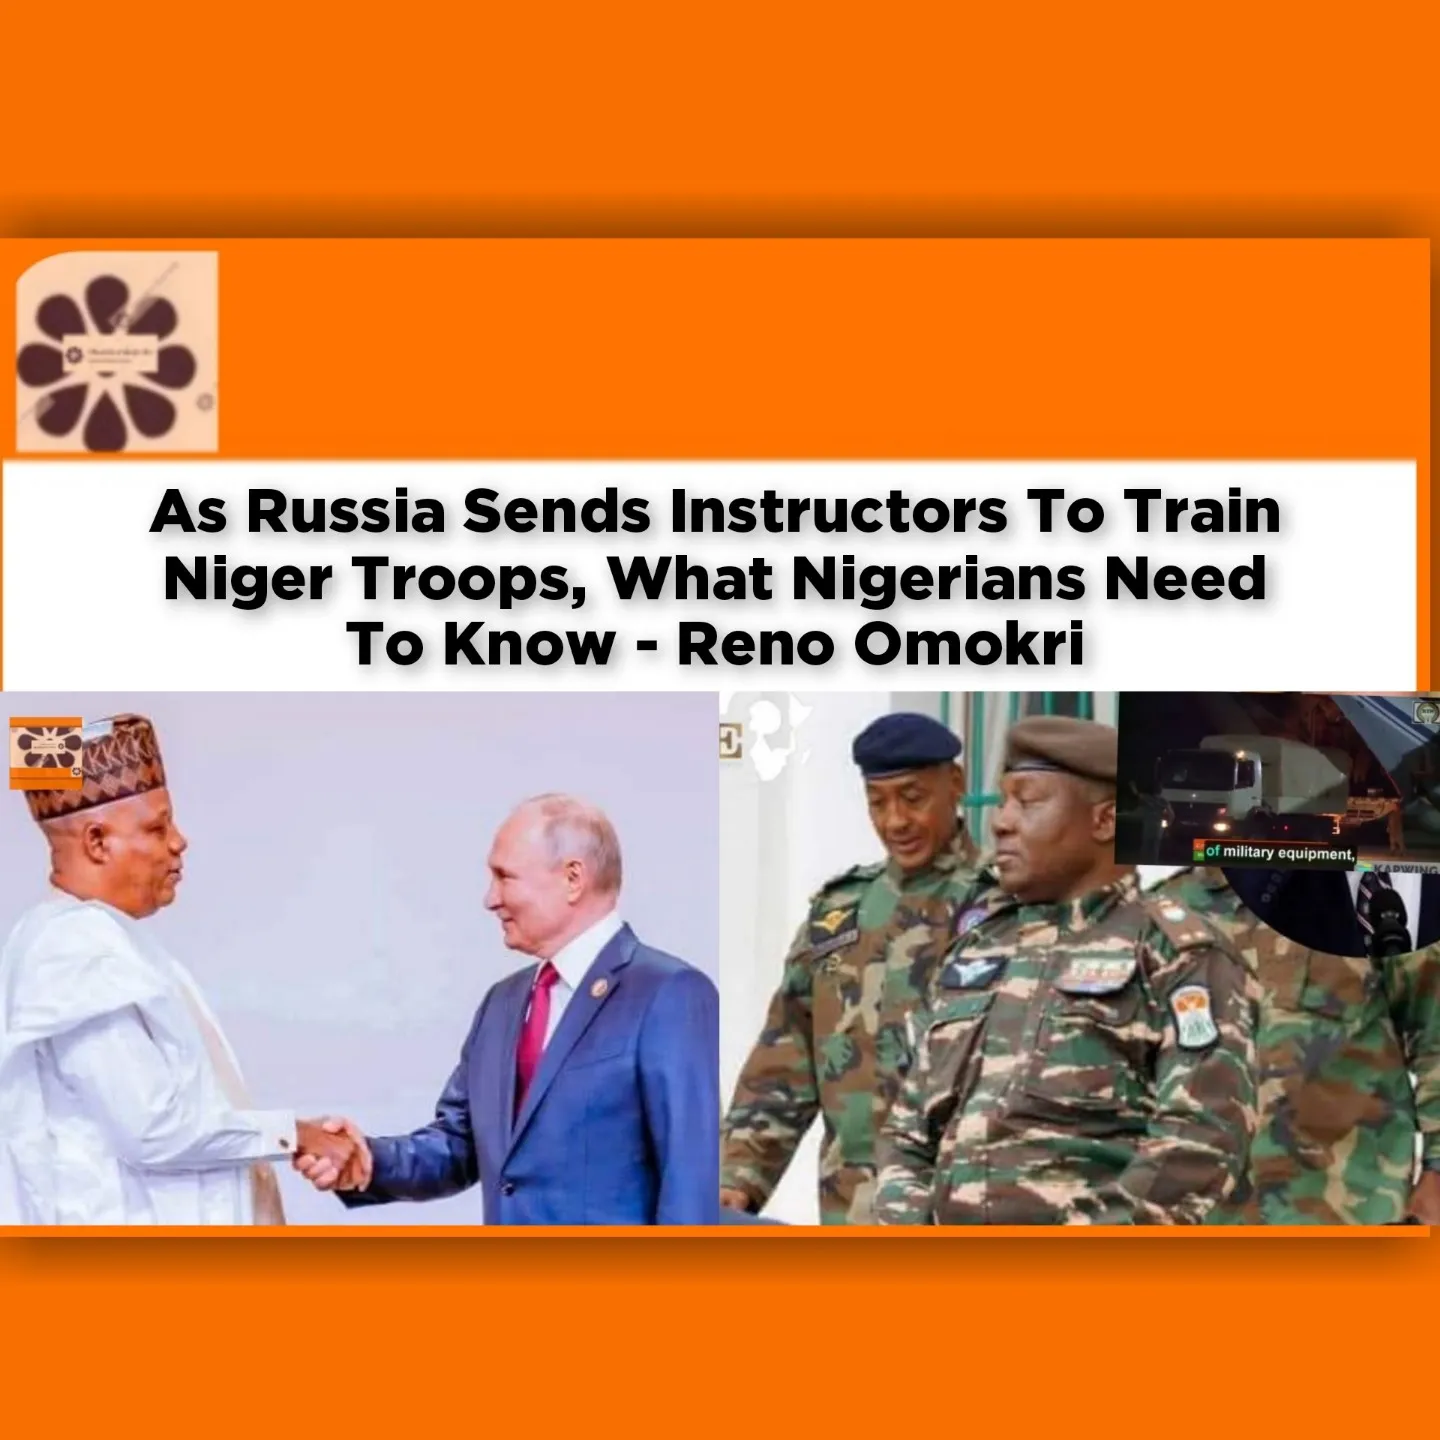 As Russia Sends Instructors To Train Niger Troops, What Nigerians Need To Know - Reno Omokri ~ OsazuwaAkonedo #Niger #Nigeria #Omokri #Reno #Russia